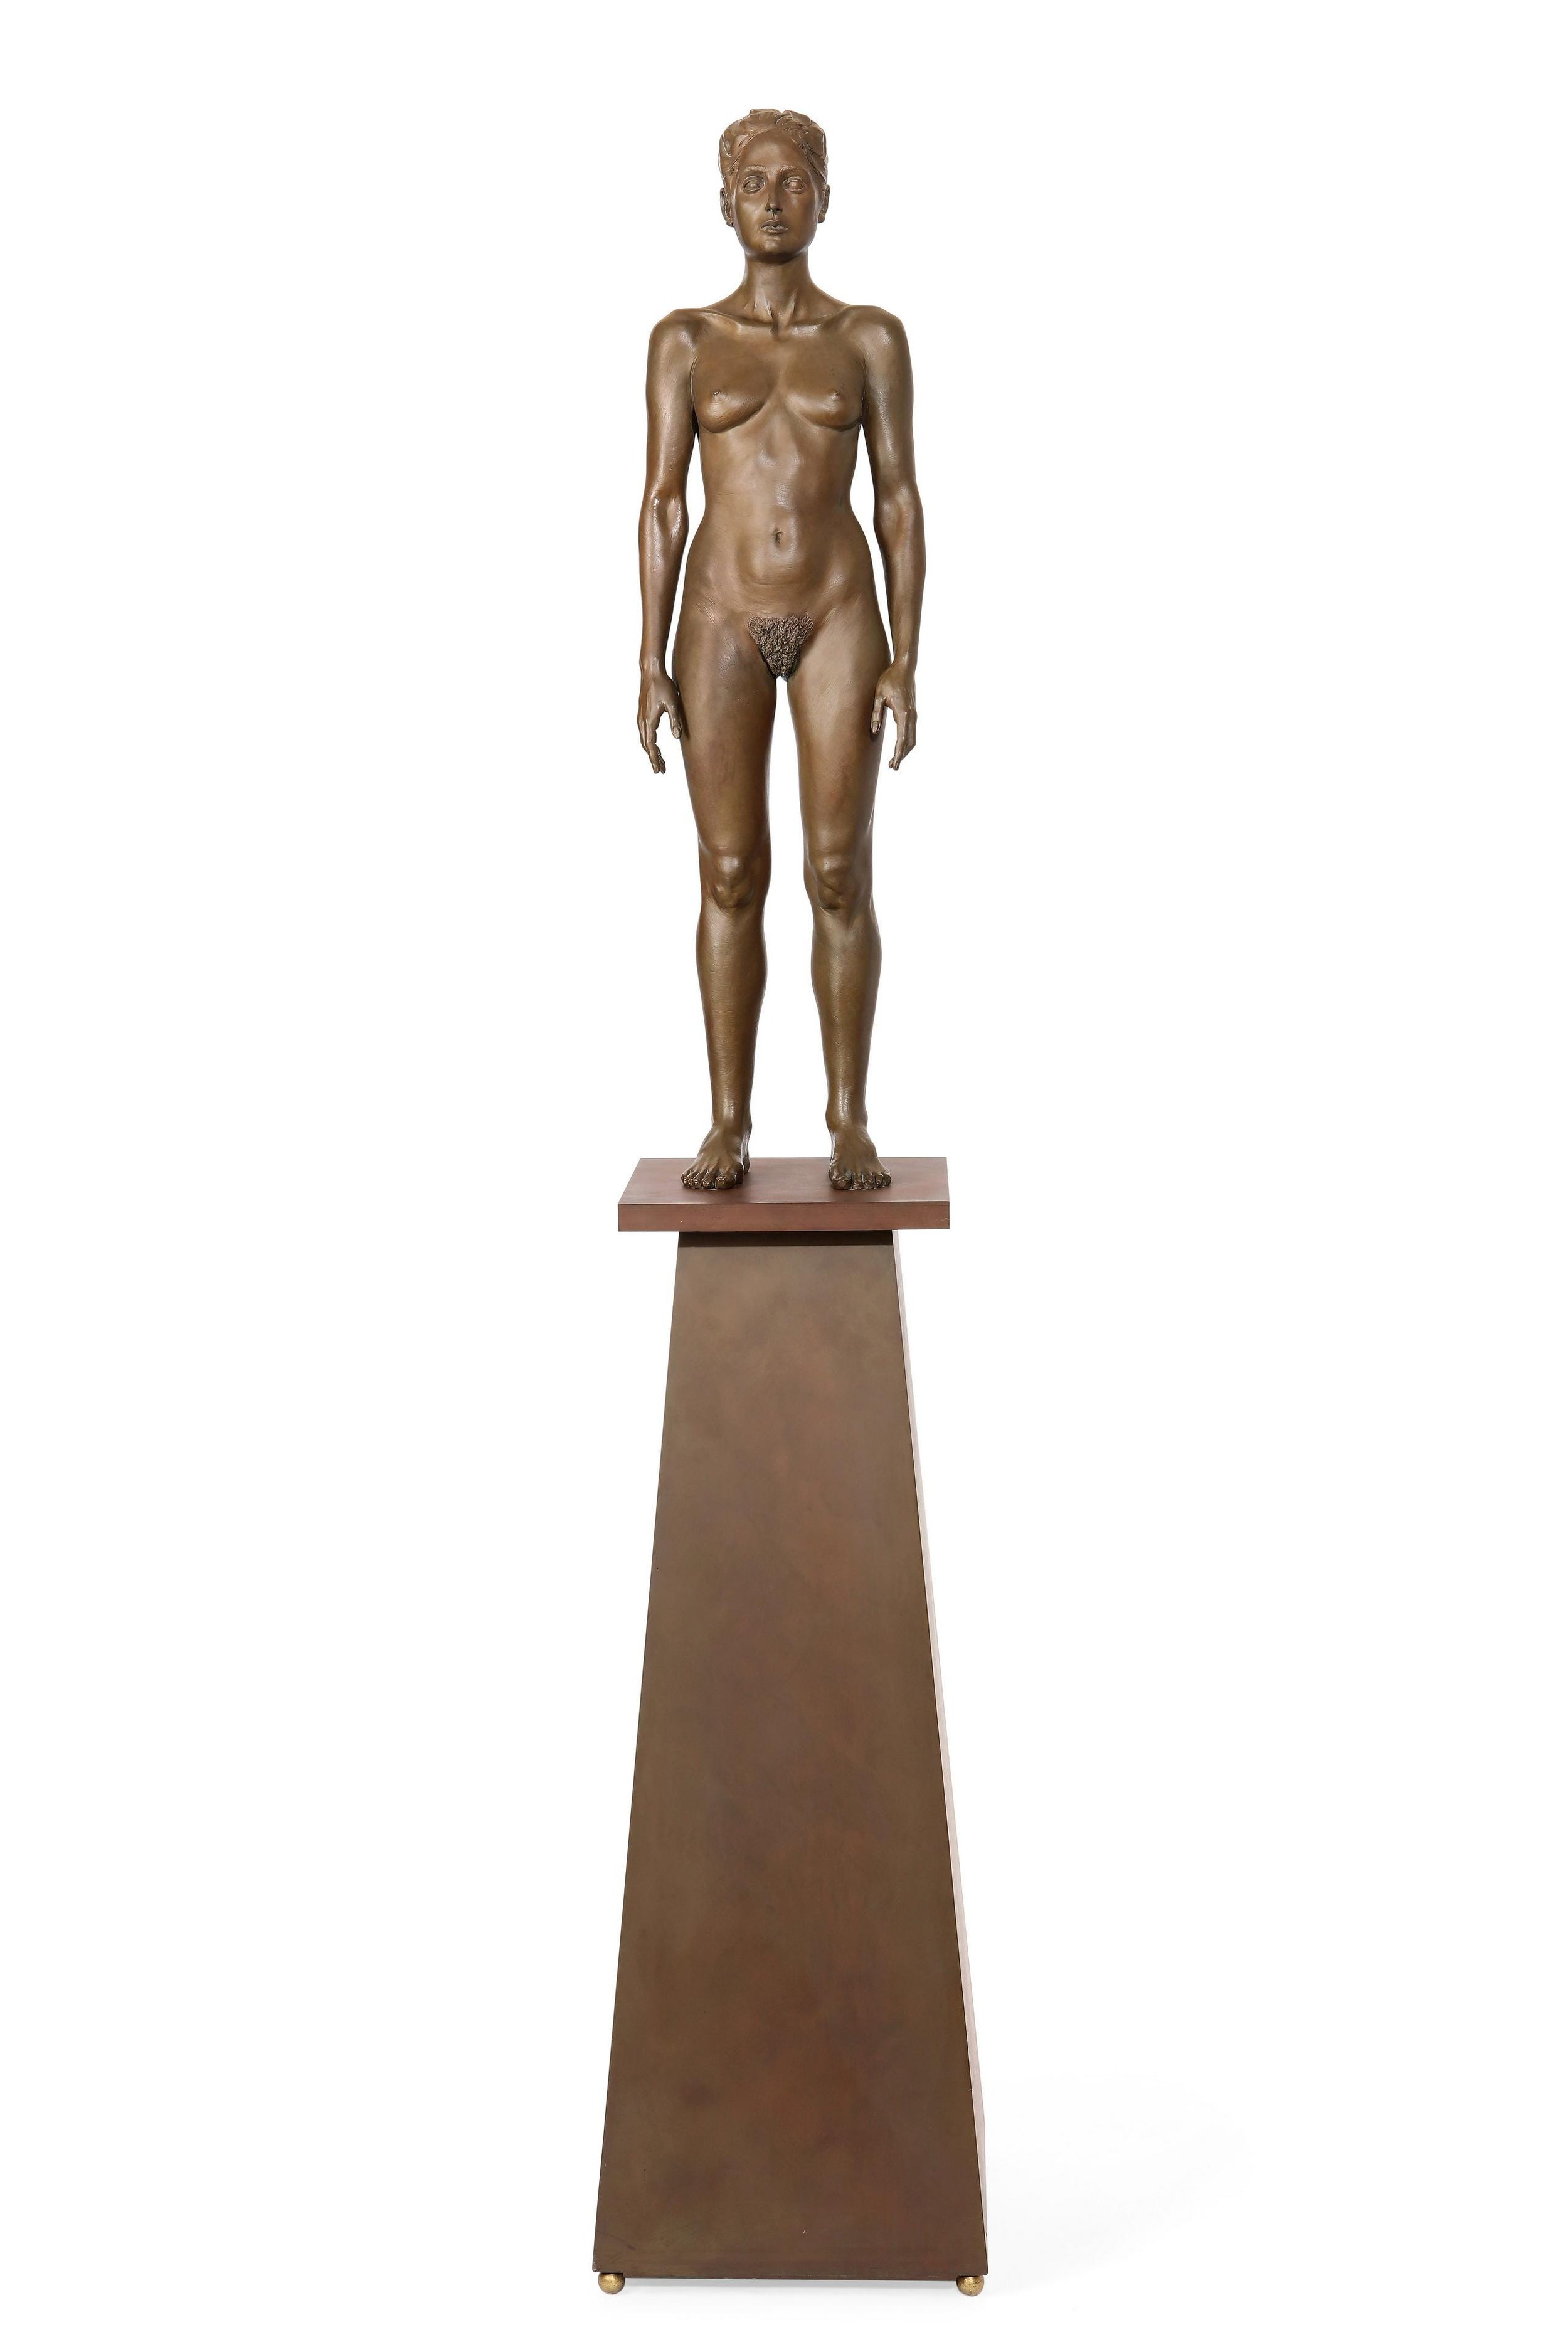  Robert Graham  (1938-2008)  Kim, 1984  Cast bronze  From the numbered edition of 6  Incised with the artist’s signature and numbered on the reverse of the upper base  Provenance: Texas Gallery, Houston  76 x 14 x 14 inches including base  Estimate: 